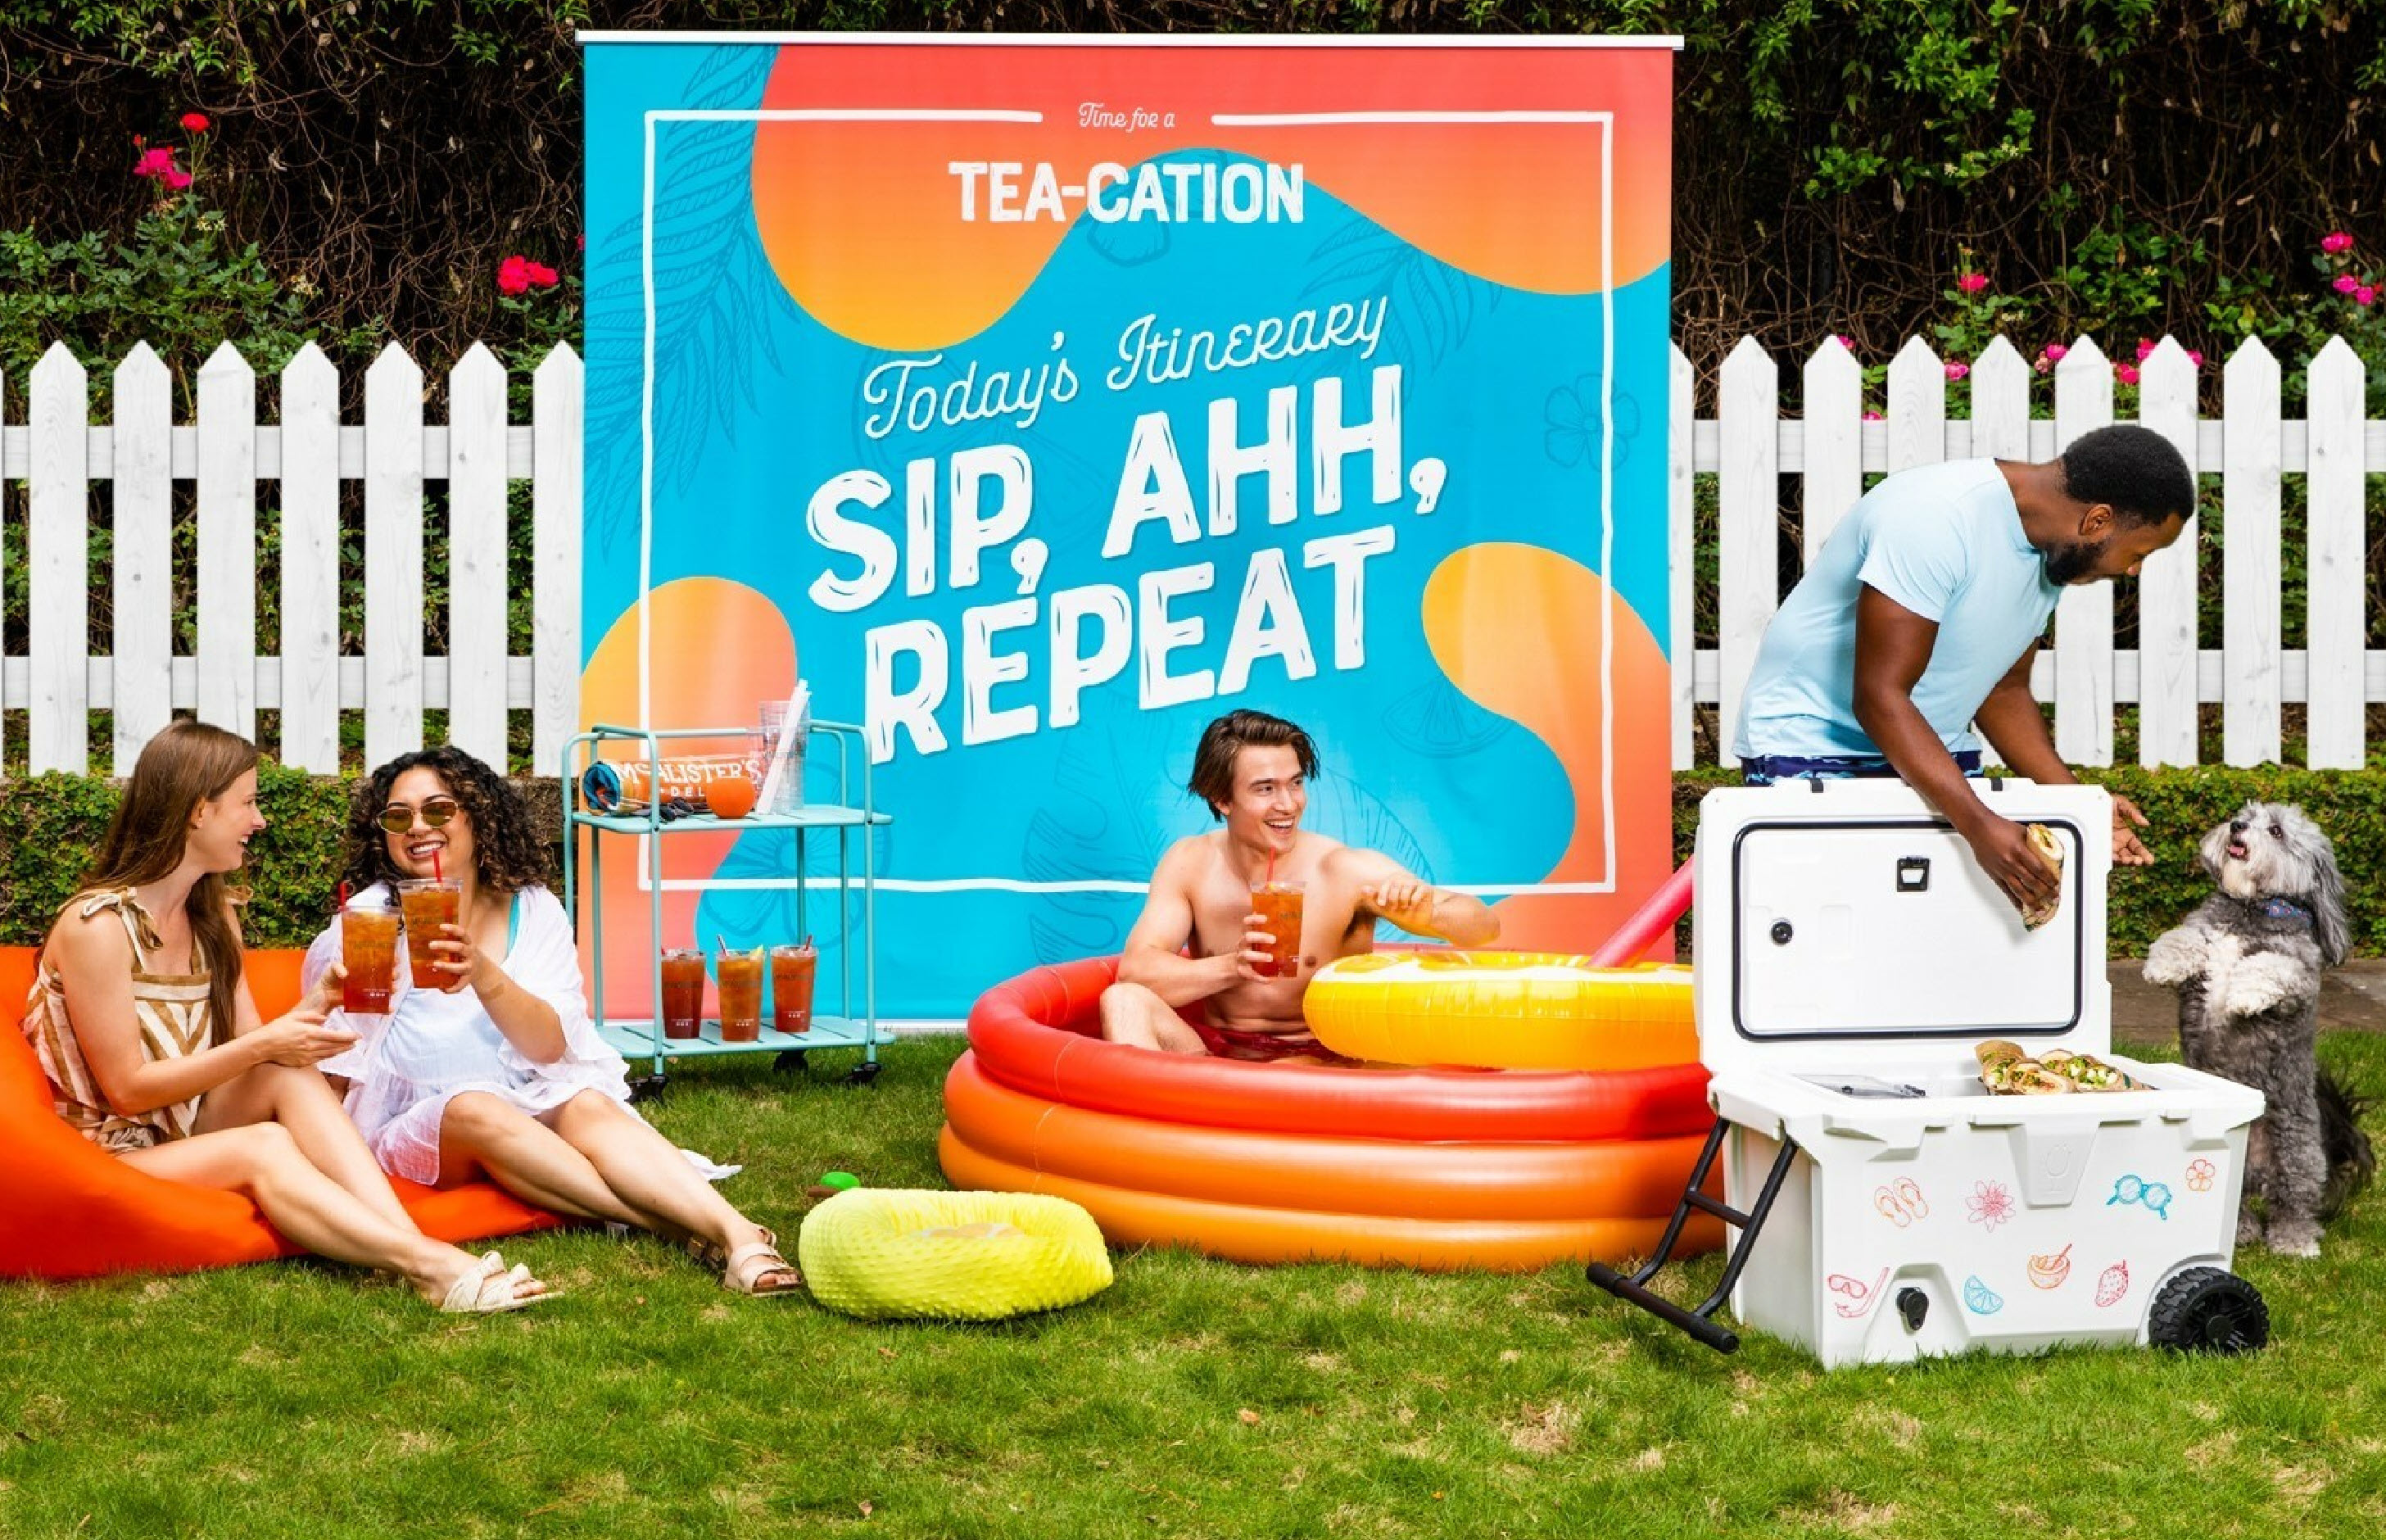 National Iced Tea Month McAlisters Deli Tea-Cation